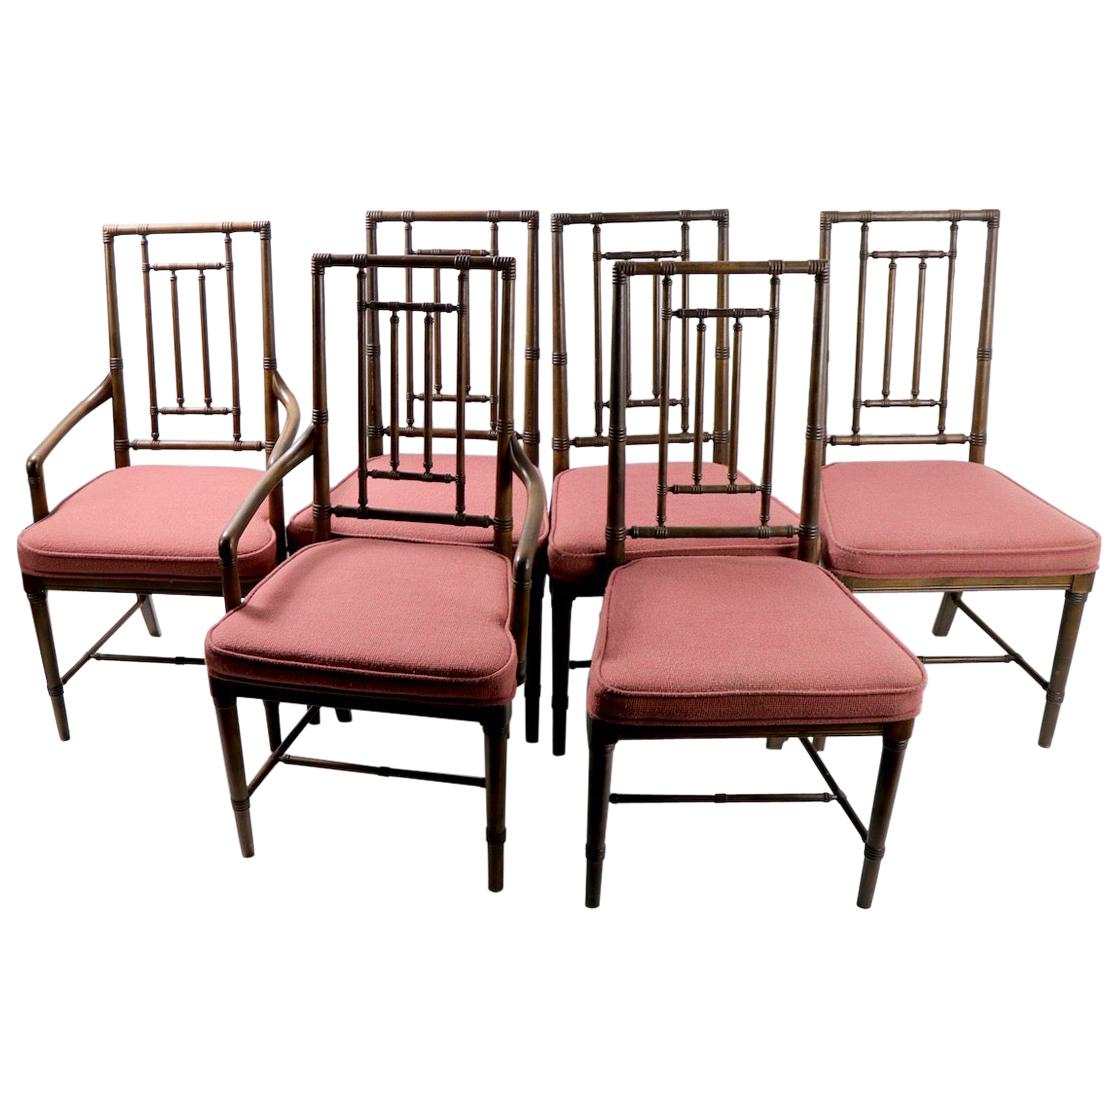 Set of 6 Faux Bamboo Dining Chairs in the style of McGuire